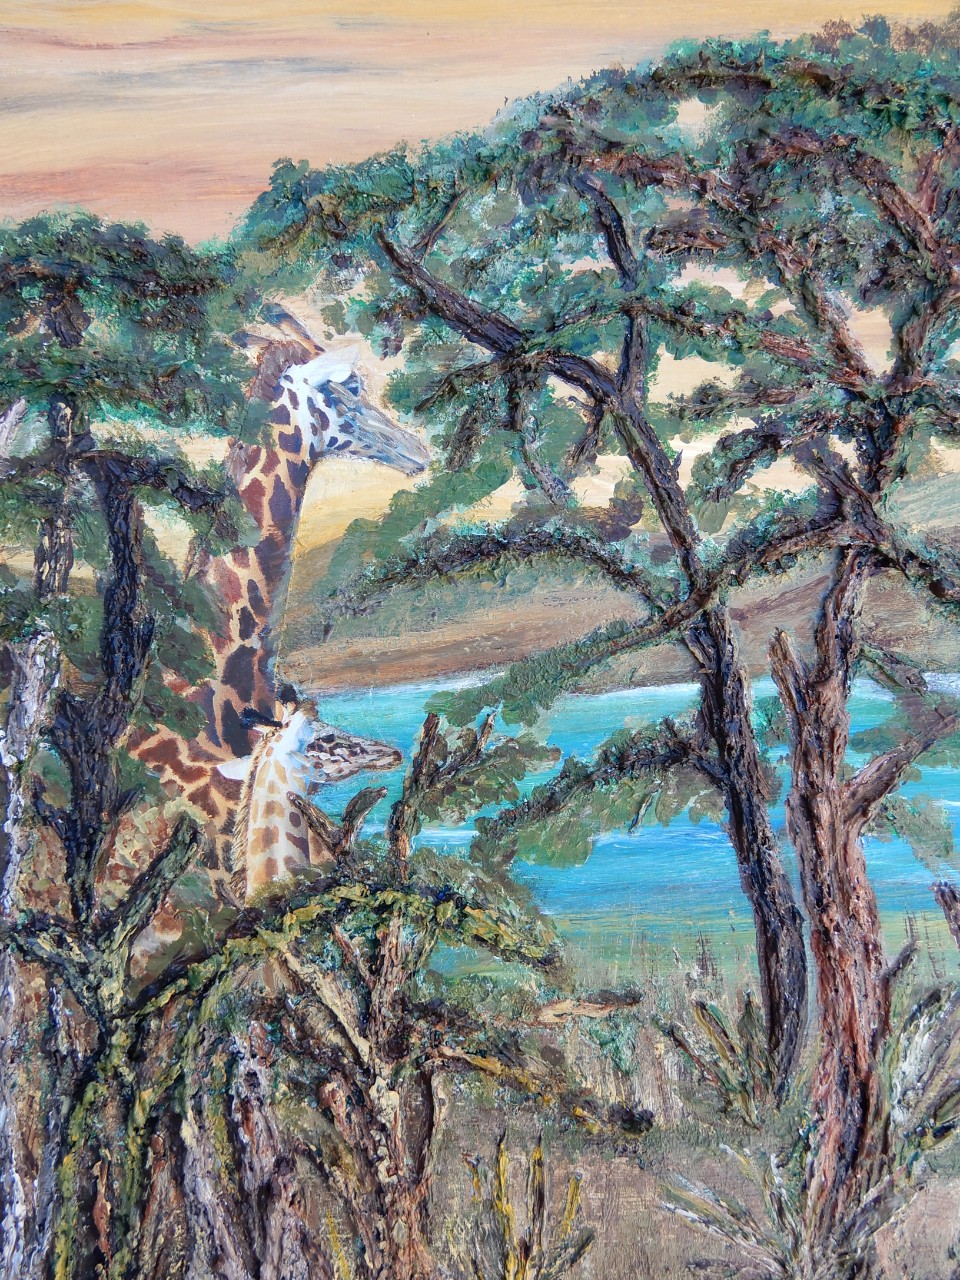 Painting shows a full grown giraffe and a smaller younger giraffe standing side by side amongst some trees in front of a small body of water.